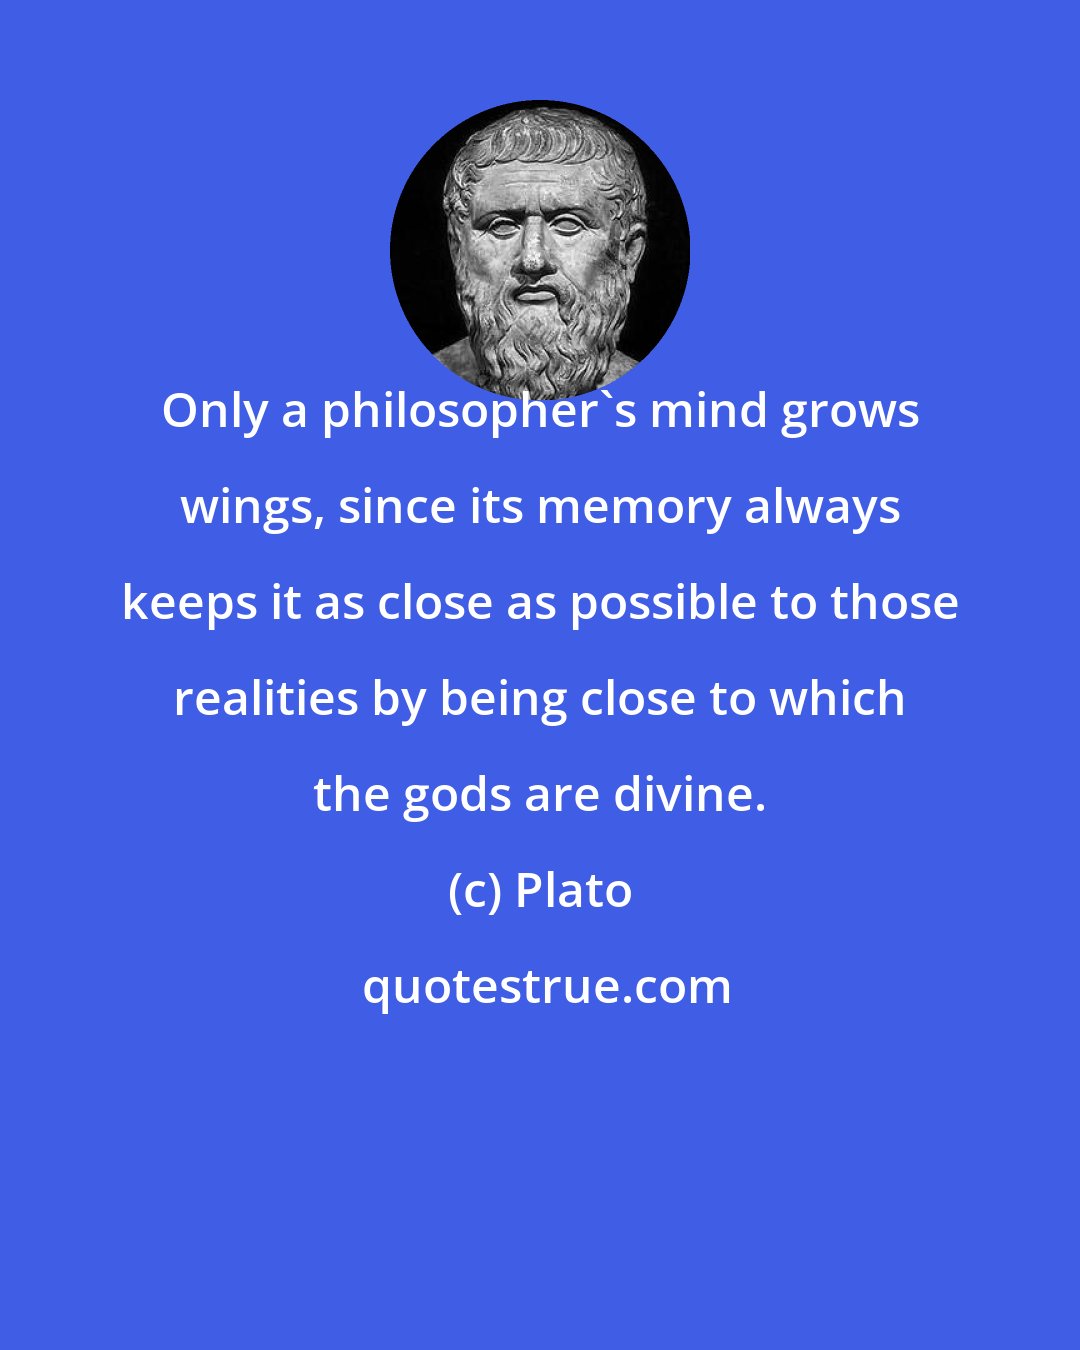 Plato: Only a philosopher's mind grows wings, since its memory always keeps it as close as possible to those realities by being close to which the gods are divine.